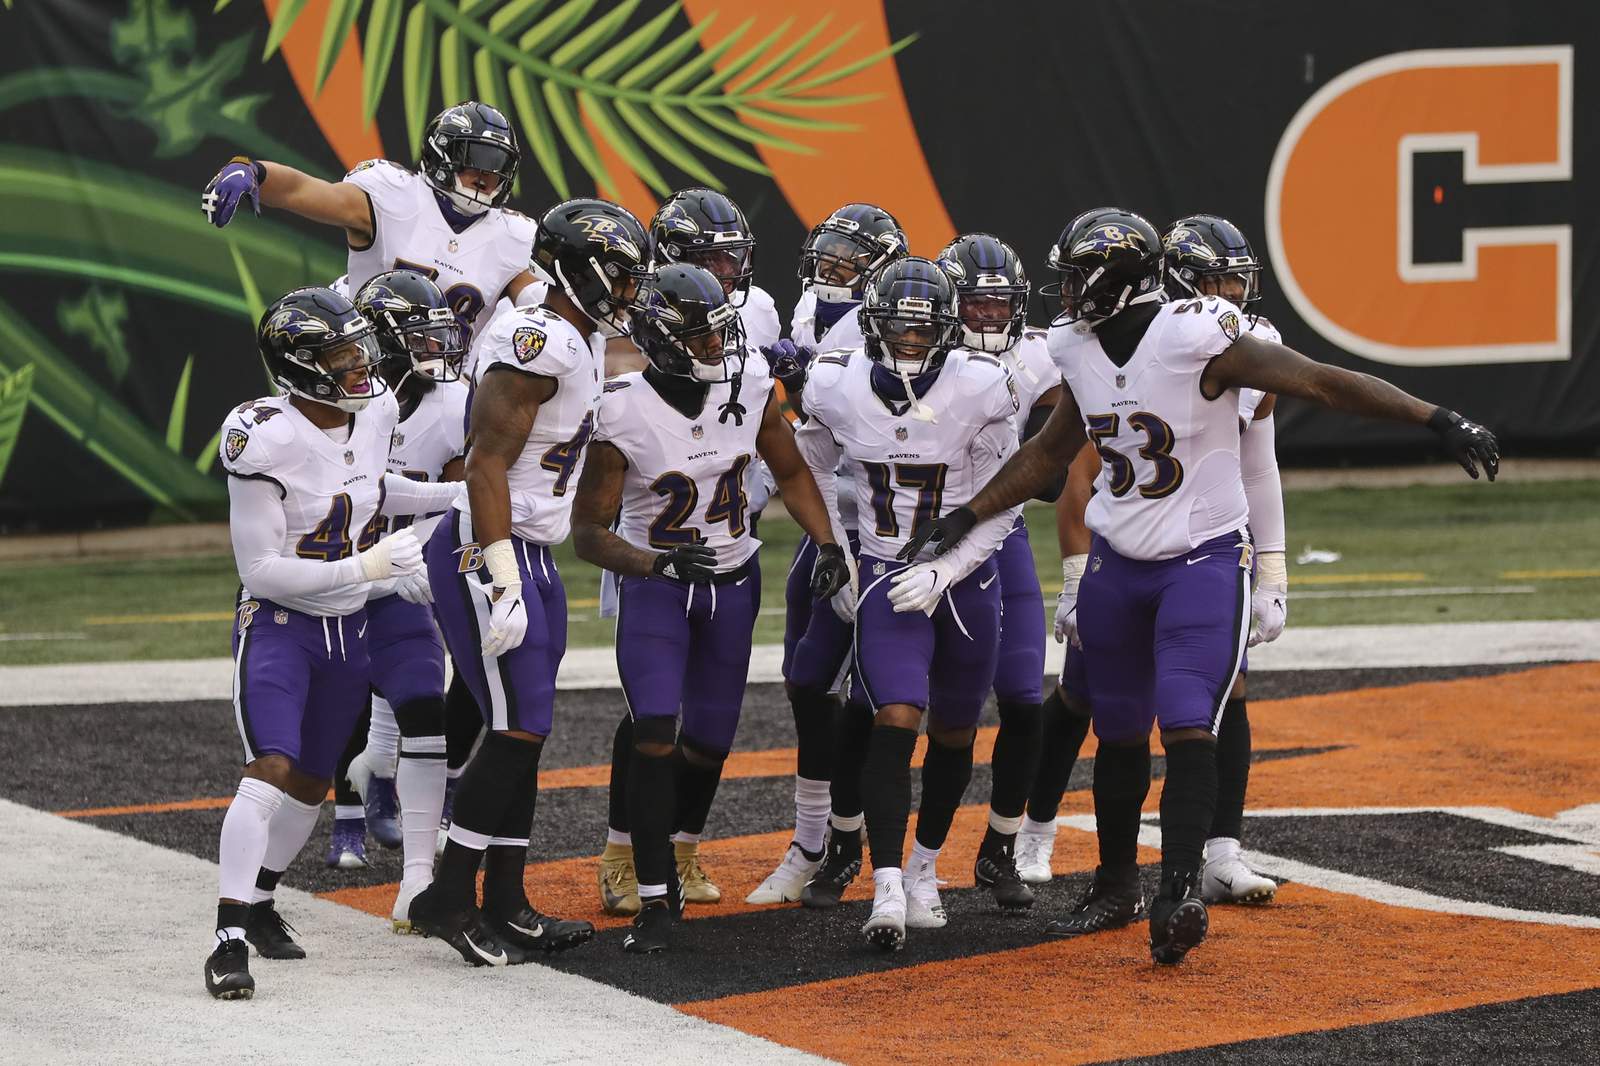 Ravens clinch playoff spot with 38-3 rout of Bengals